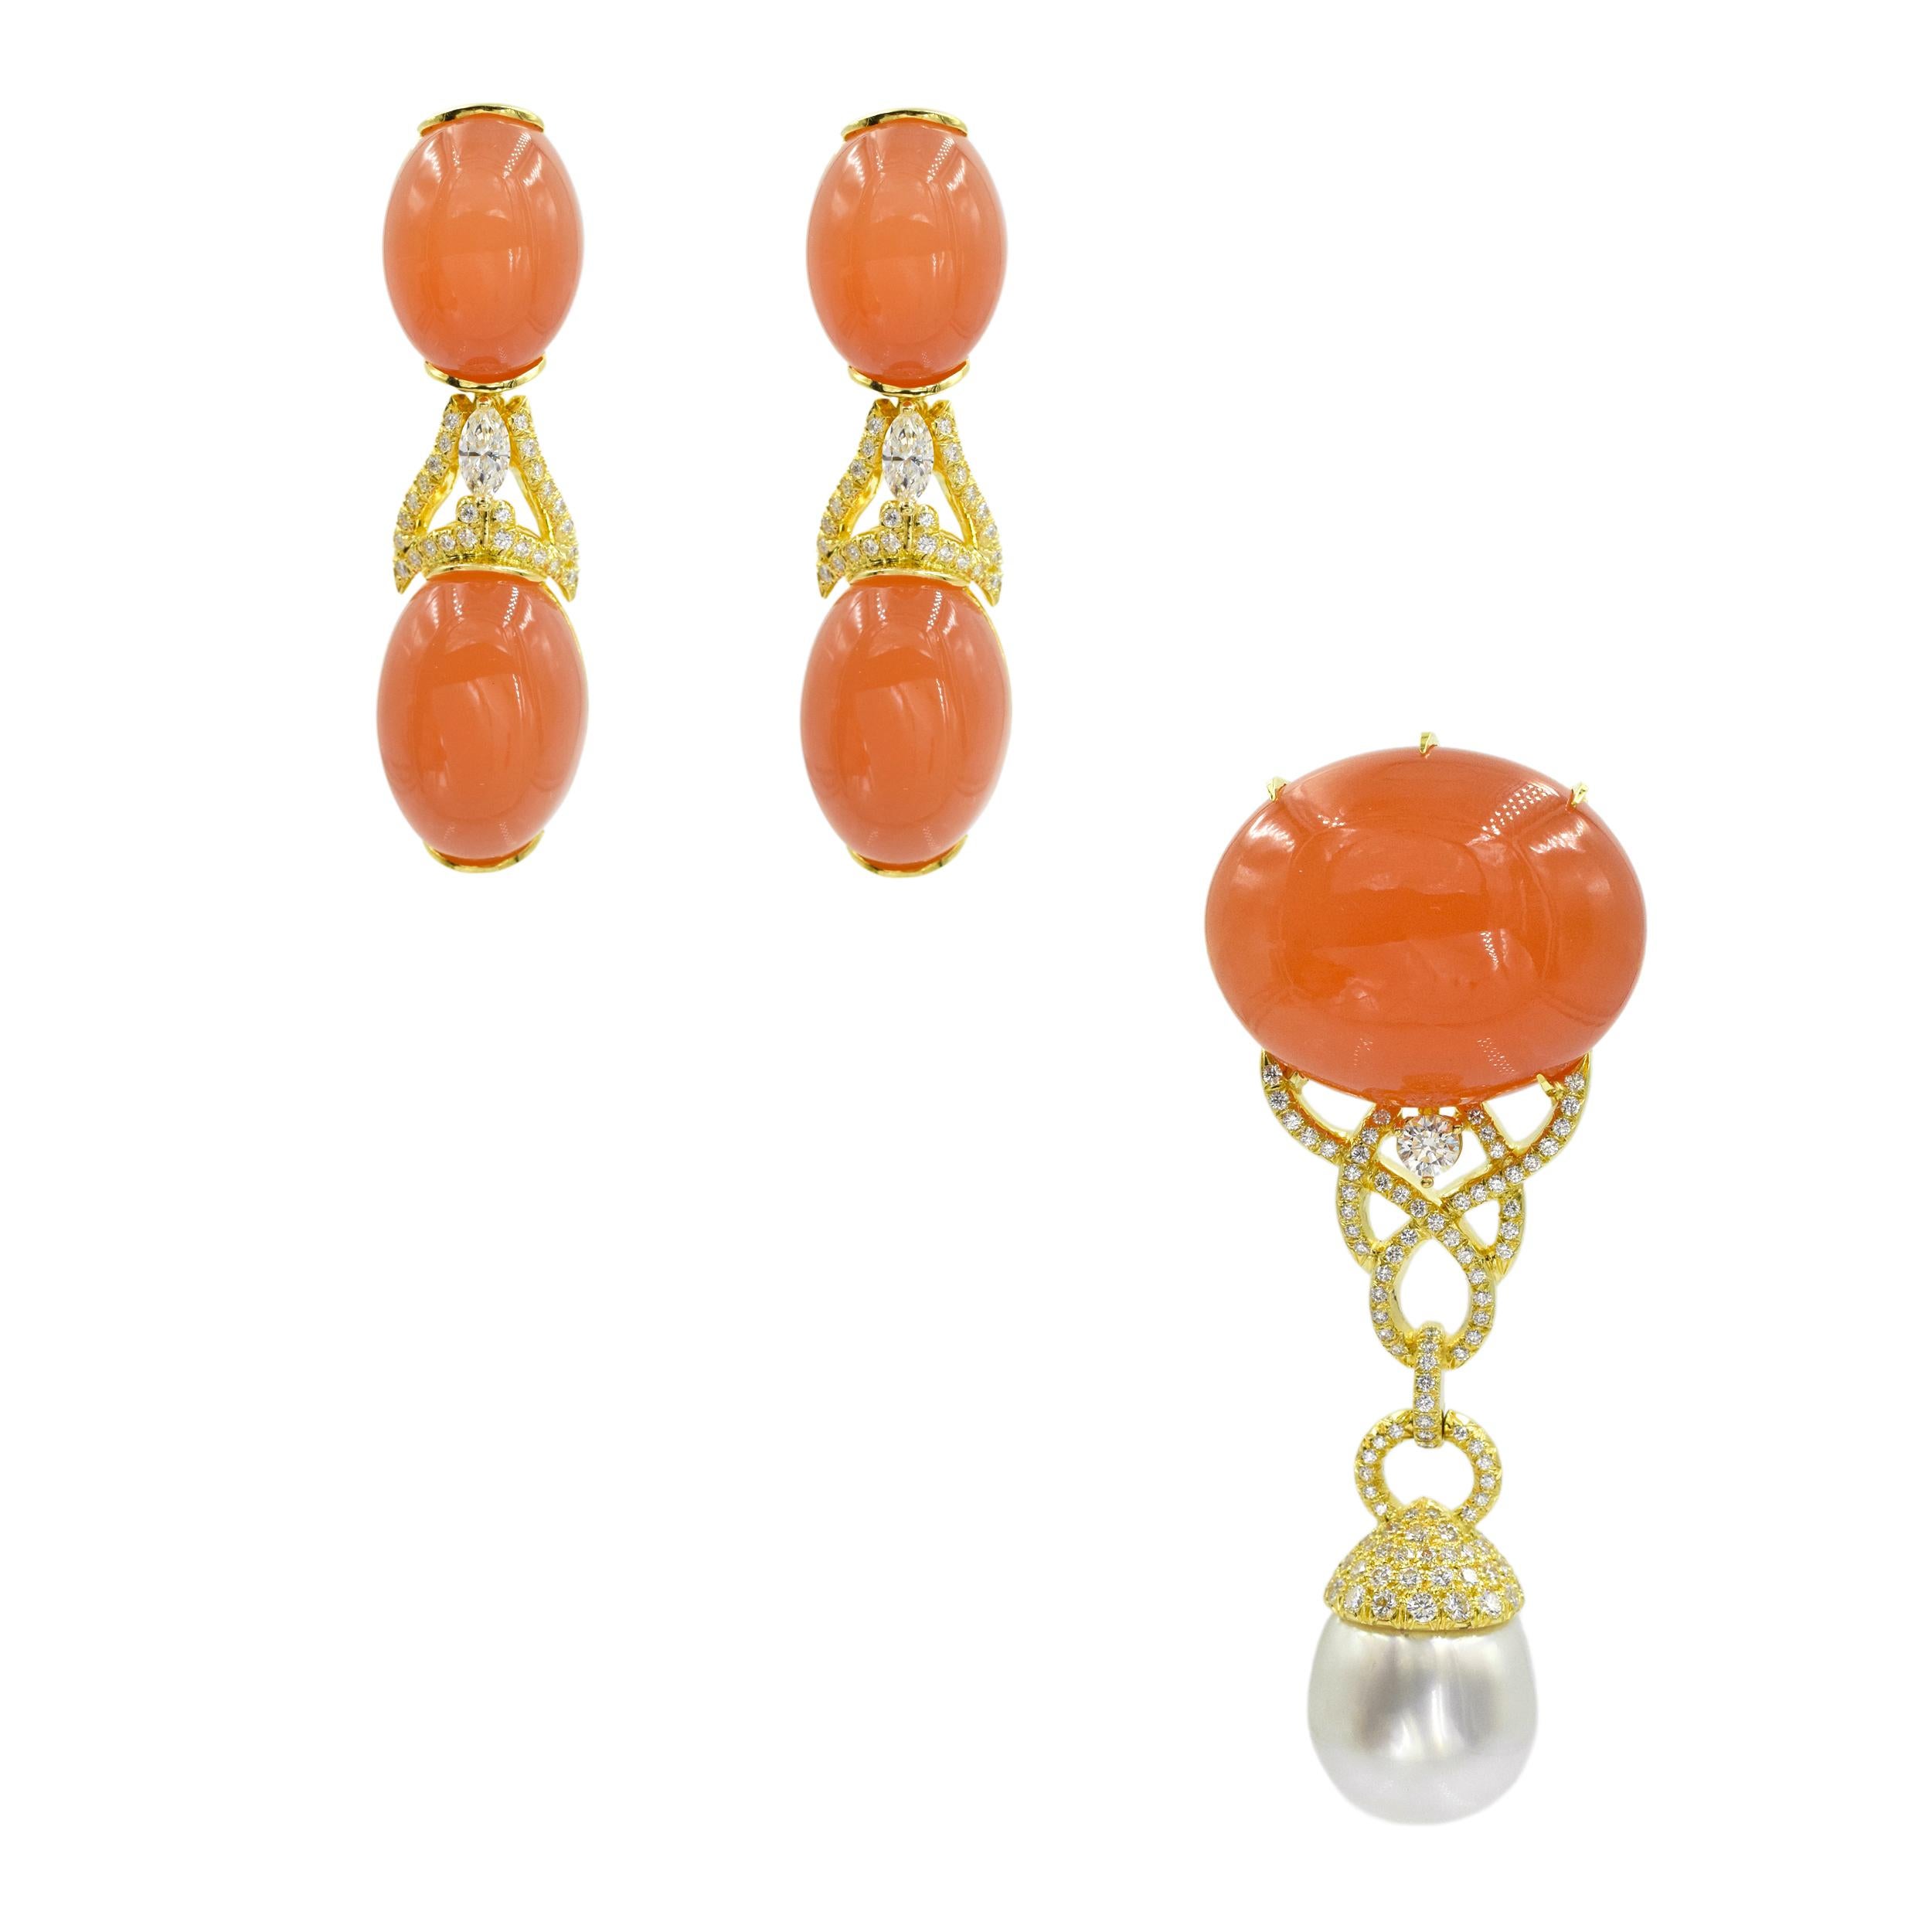 Tangerine moonstone, diamond, cultured pearl and 18k yellow gold brooch and drop earrings set by Henry Dunay.

Brooch crafted in 18k yellow gold, and pave set with 1.70ct. round brilliant cut diamonds, featuring horizontally set oval cabochon cut